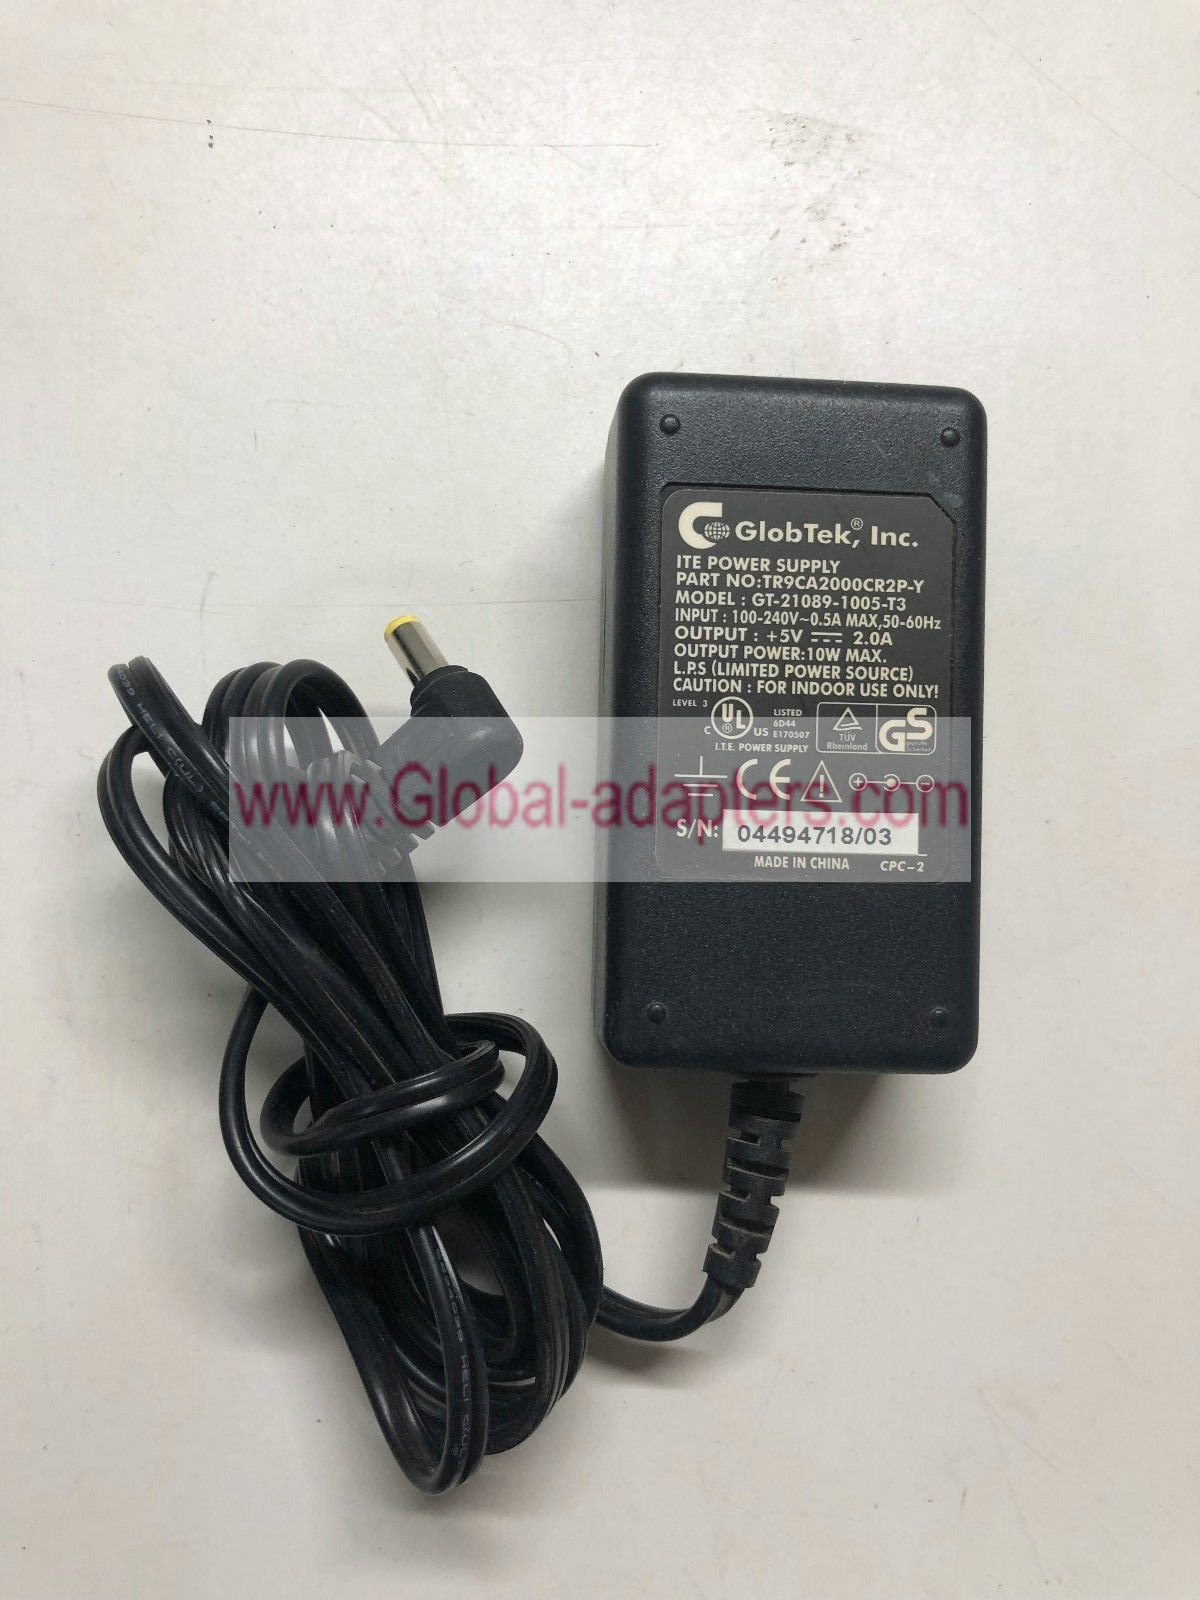 New GlobTek GT-21089-1005-T3 5V 2.0A TR9CA2000CR2P-Y ac adapter ITE power supply with power cord